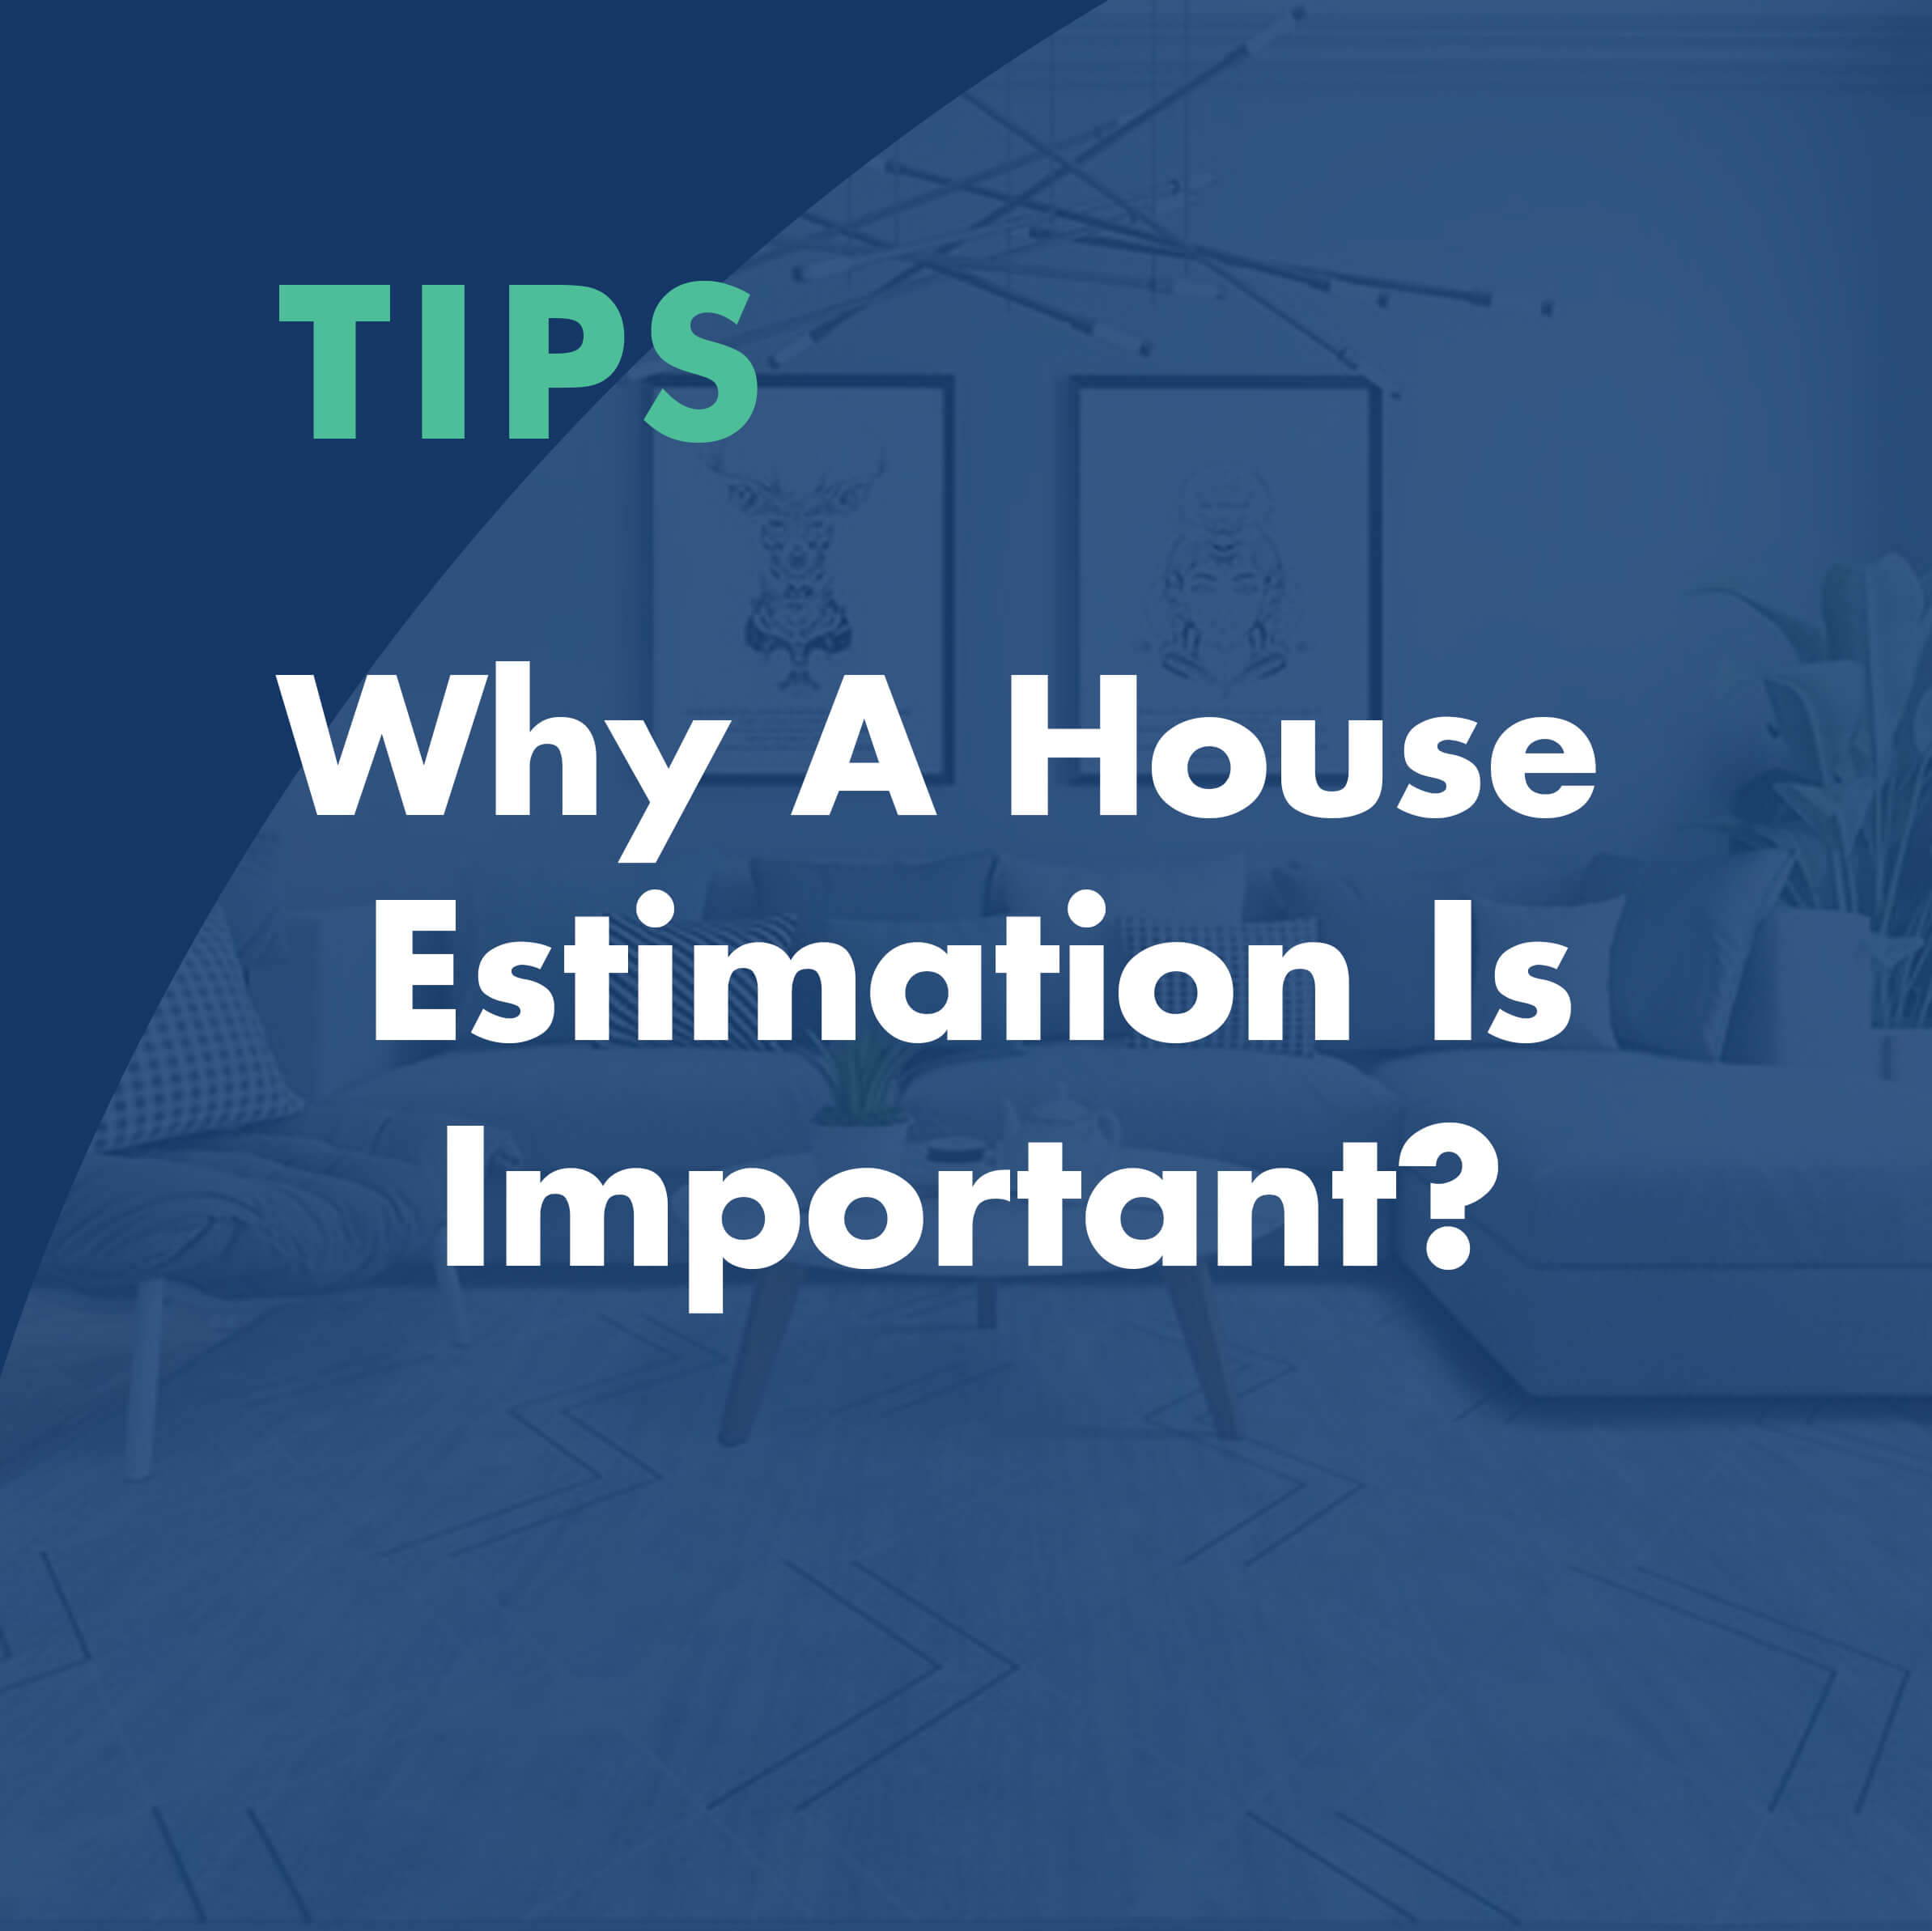 Why A House Estimation Is Important